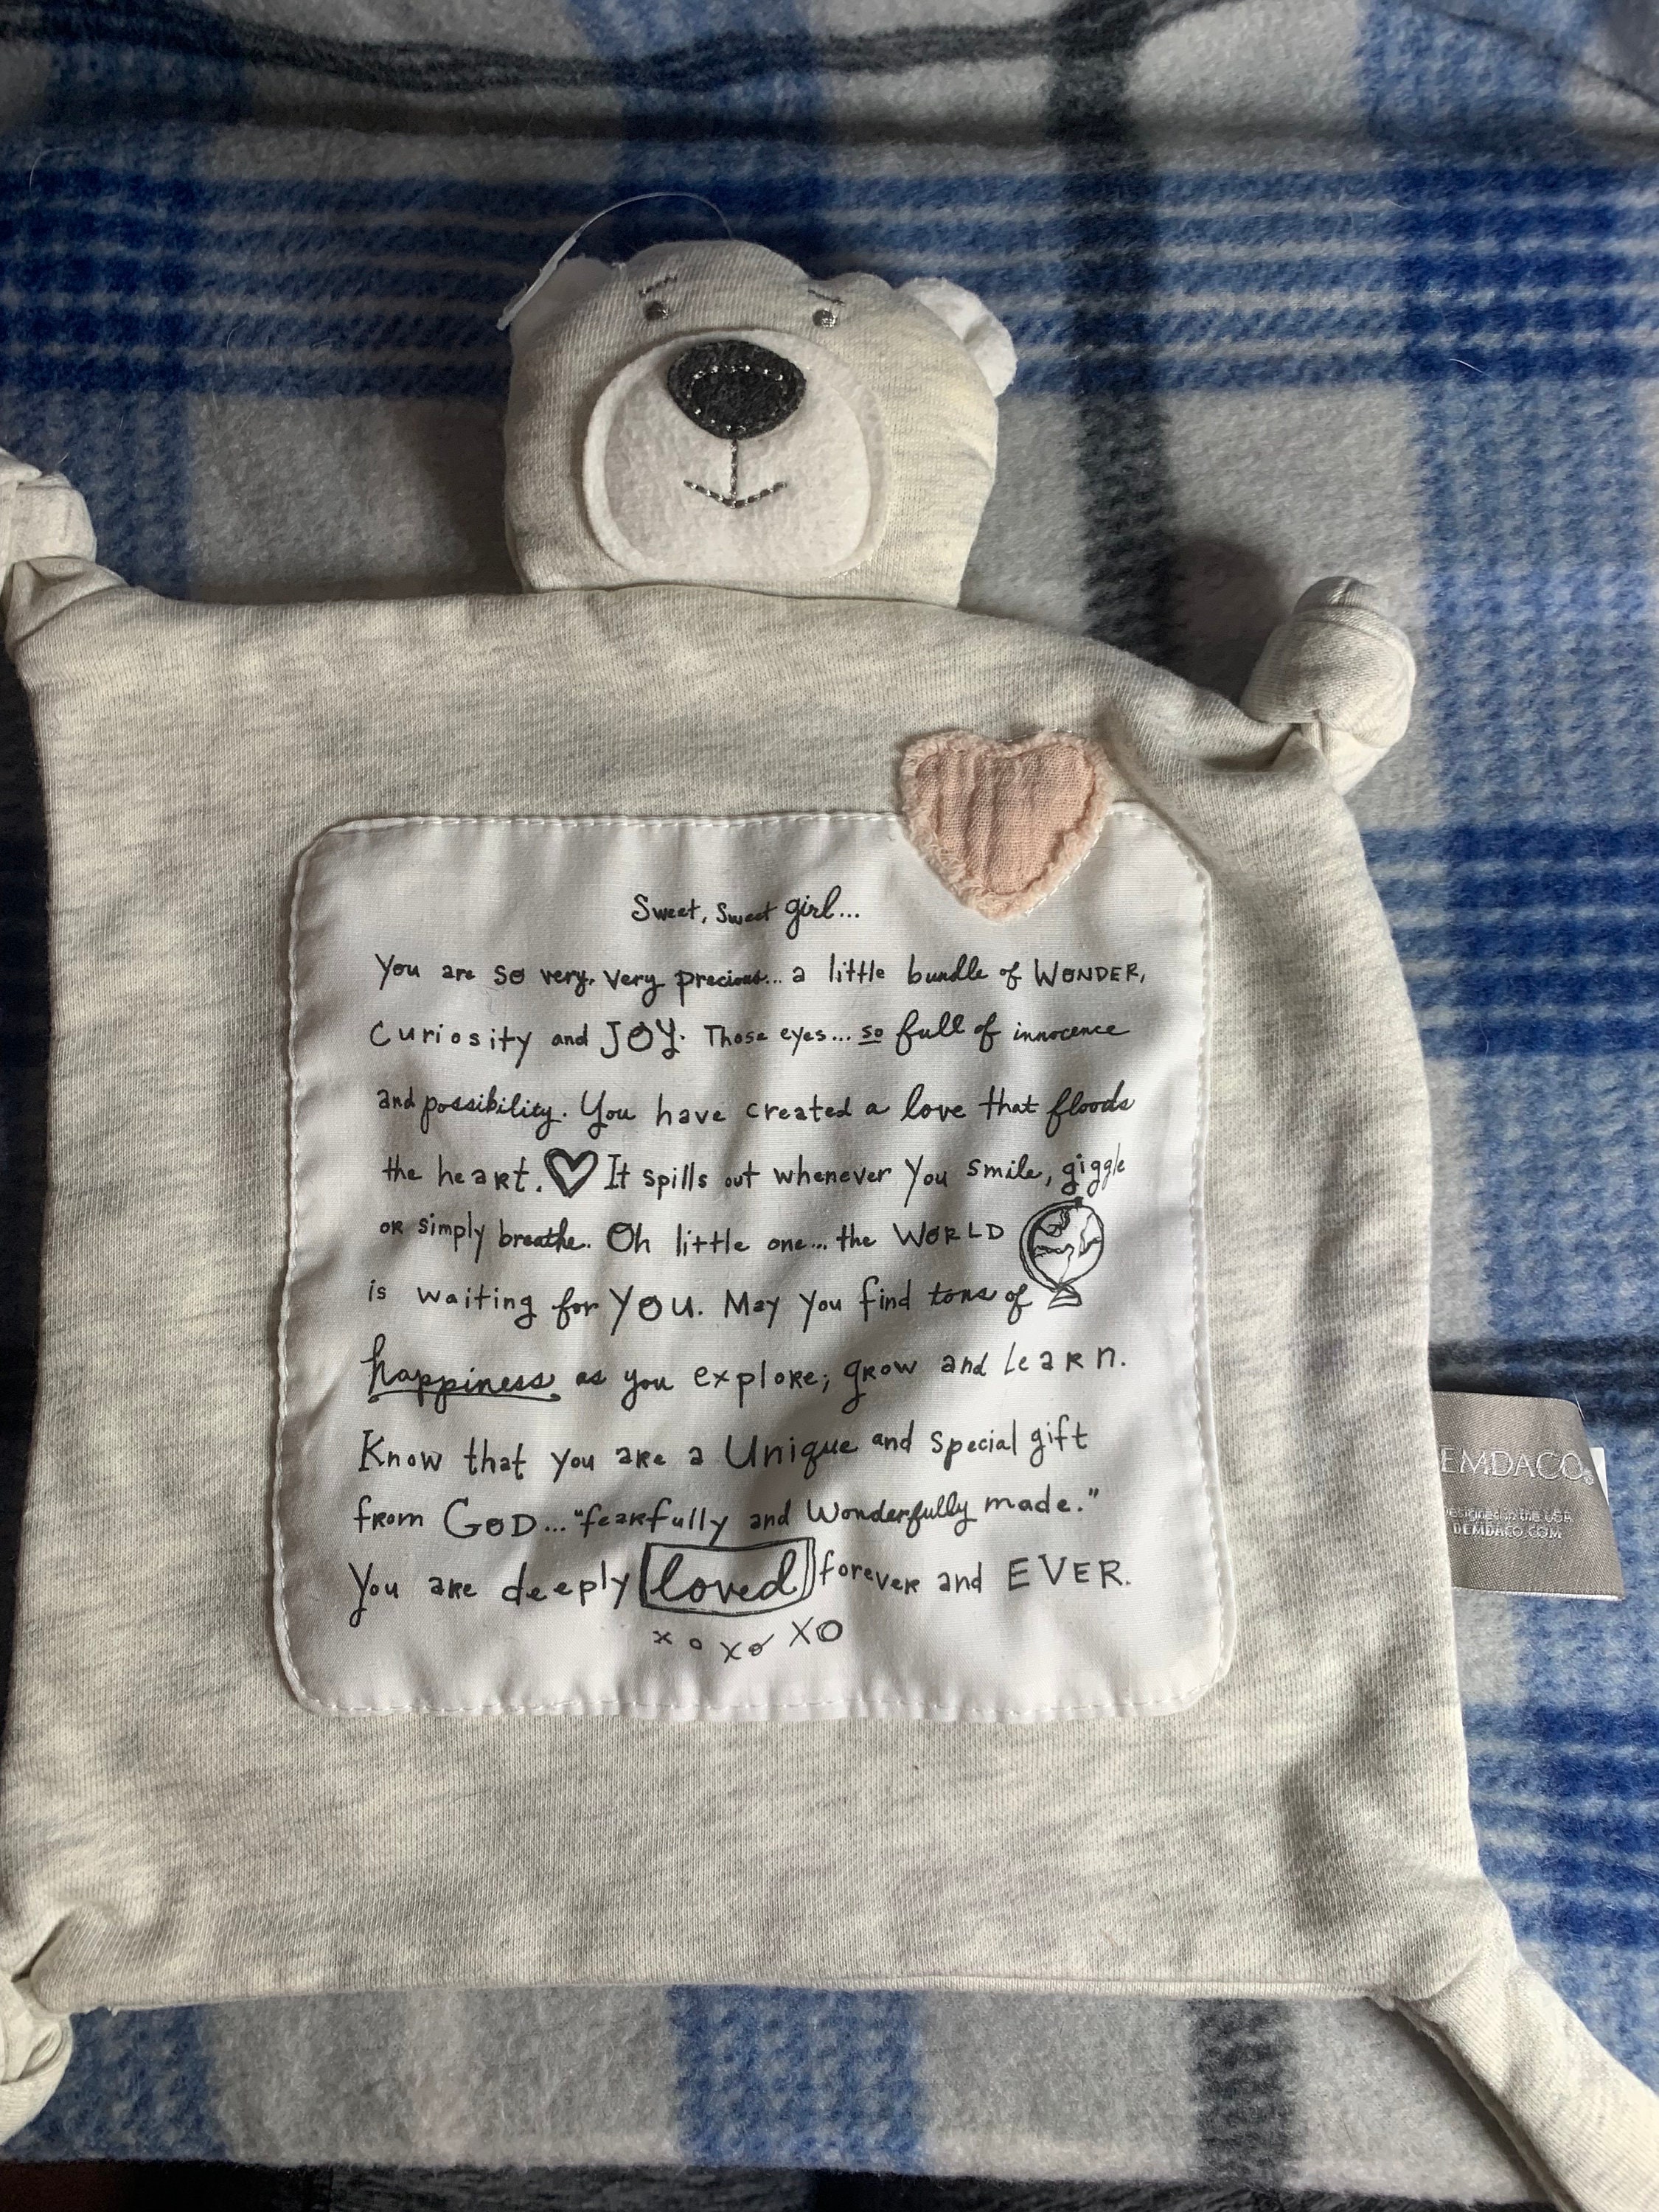 Embroidered Teddy Bear Love Crib Quilt